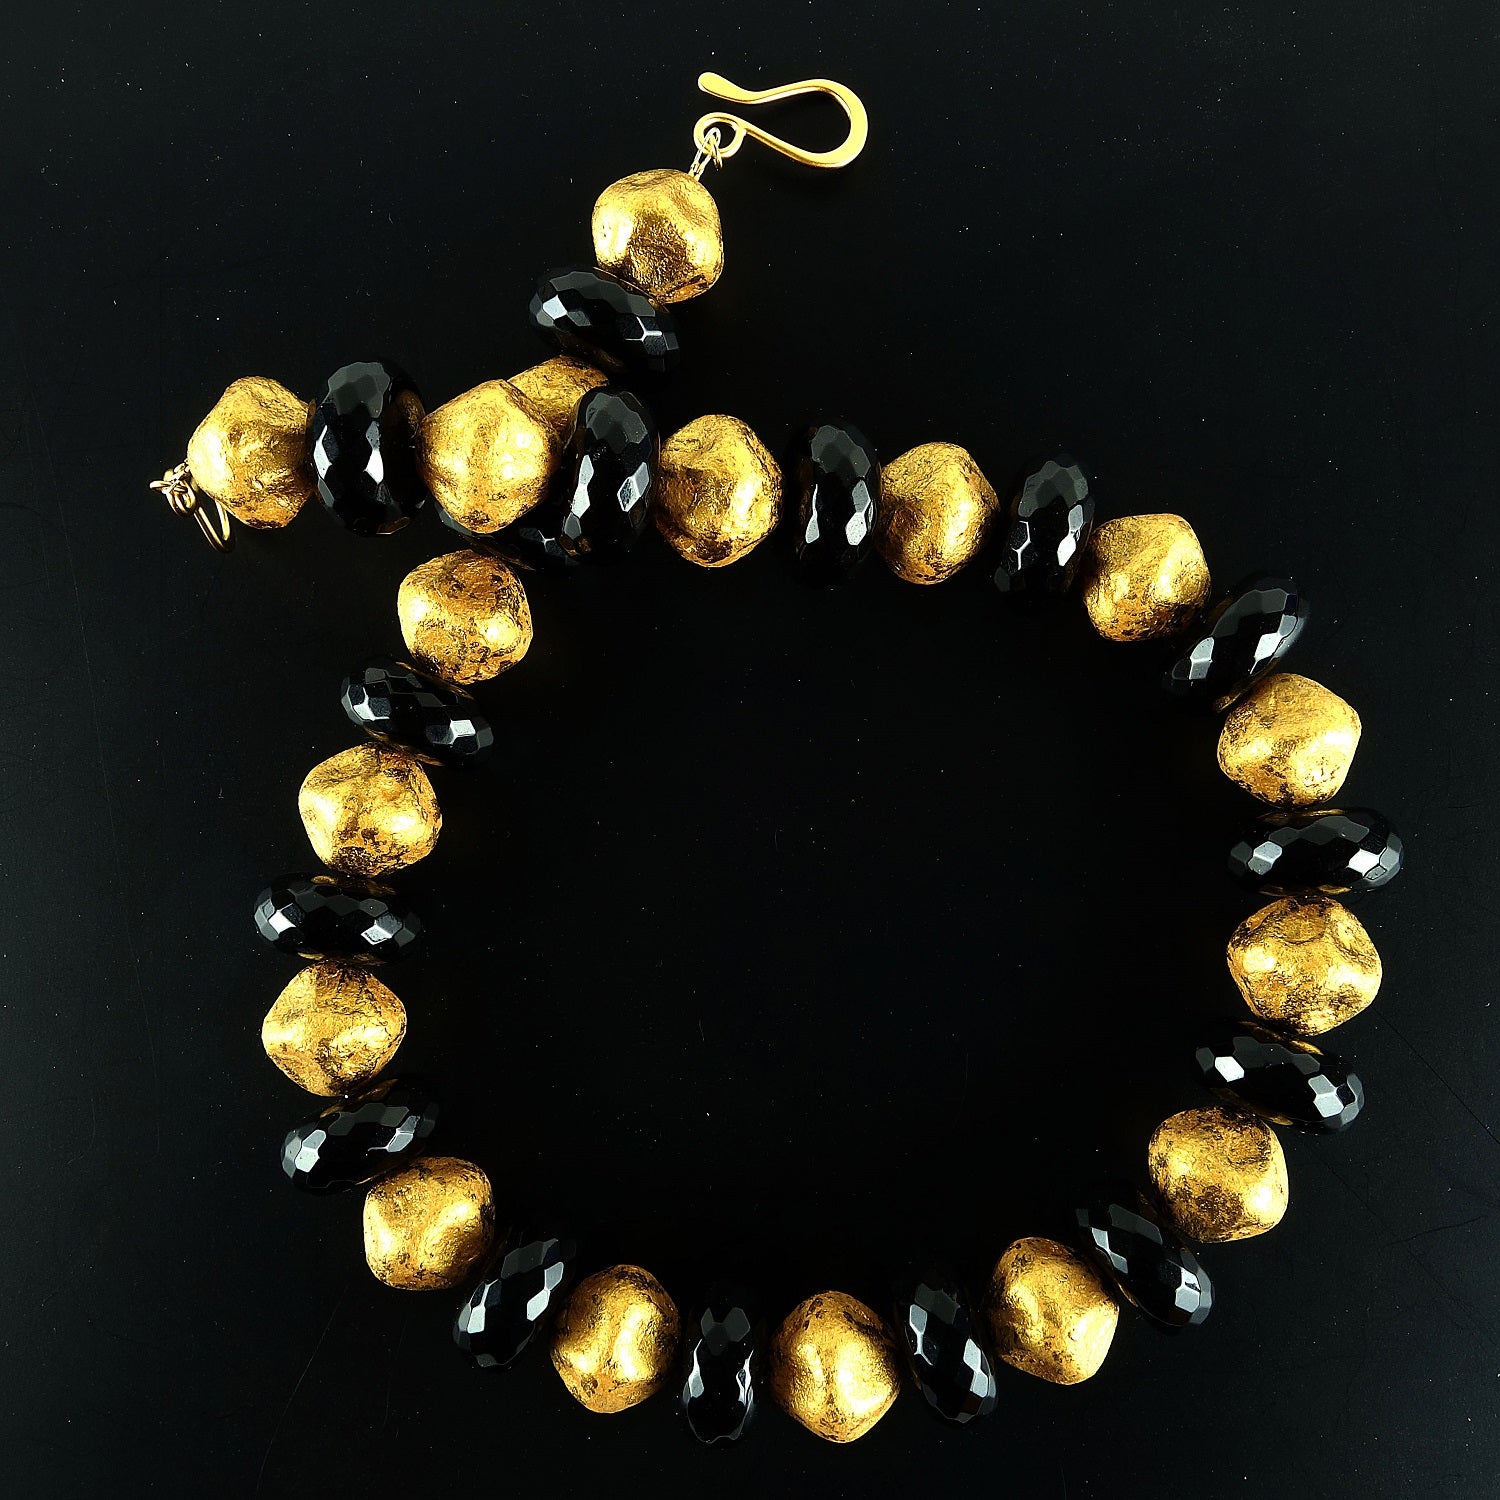 AJD 18 Inch Elegant Black Onyx and Antique Gold Bead Necklace  Great Gift!! For Sale